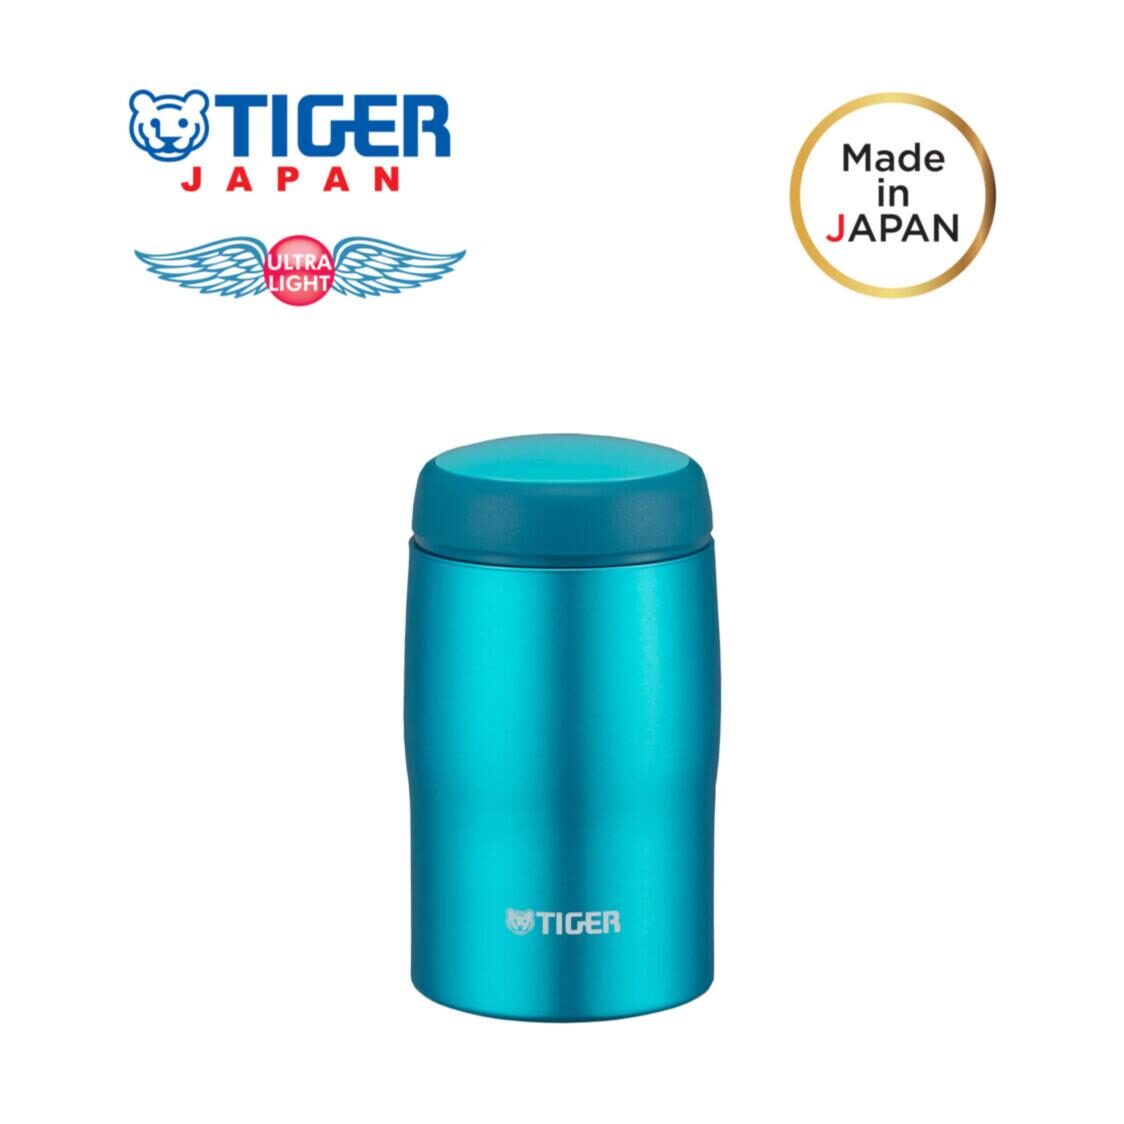 Tiger 240ml Double Stainless Steel Mug - Bright Blue Made in Japan MJA-B024 AB